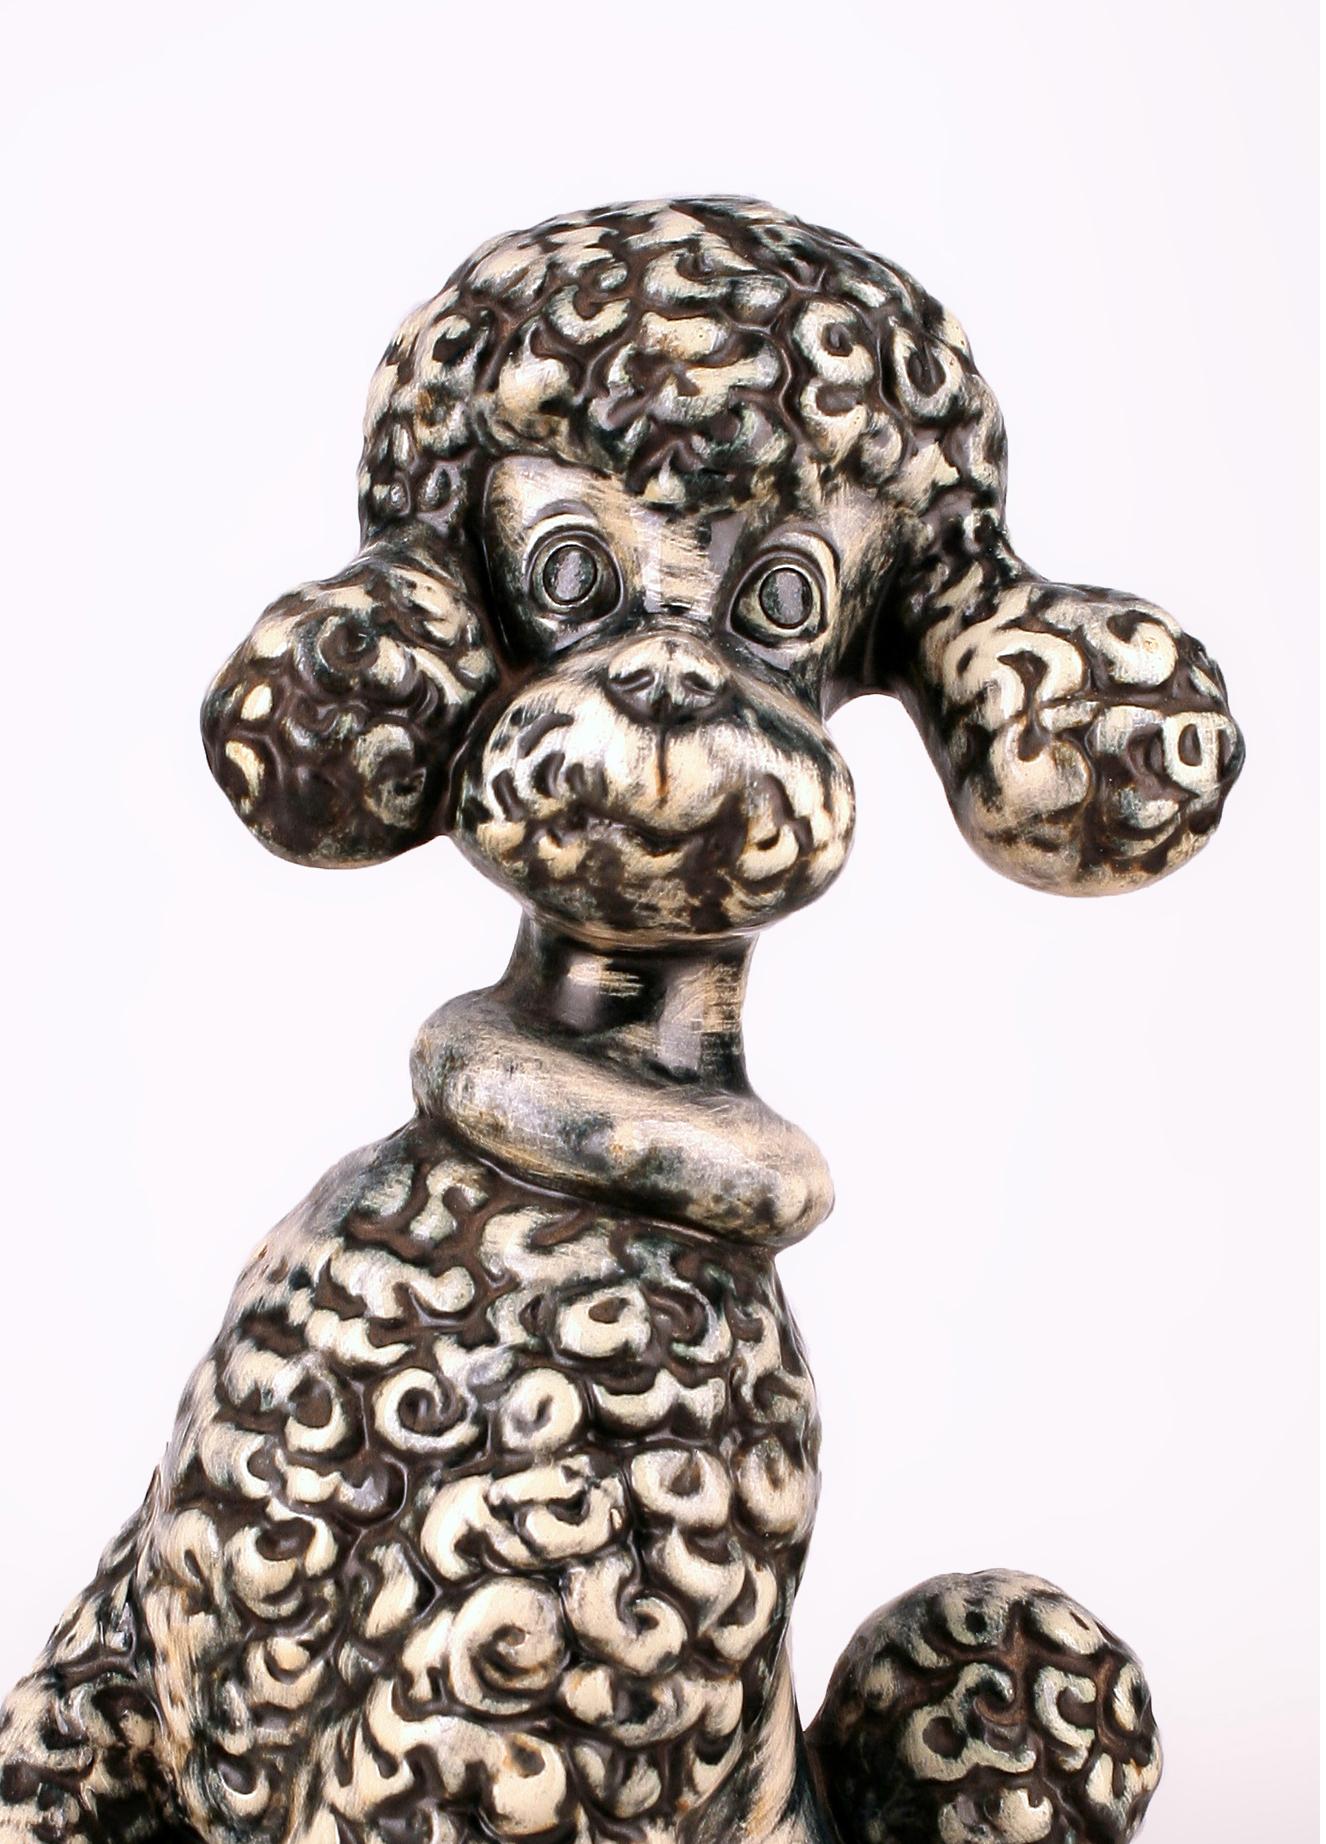 20th Century French Painted Ceramic Figure of a Poodle/Dog by Atelier Primavera In Good Condition For Sale In North Miami, FL